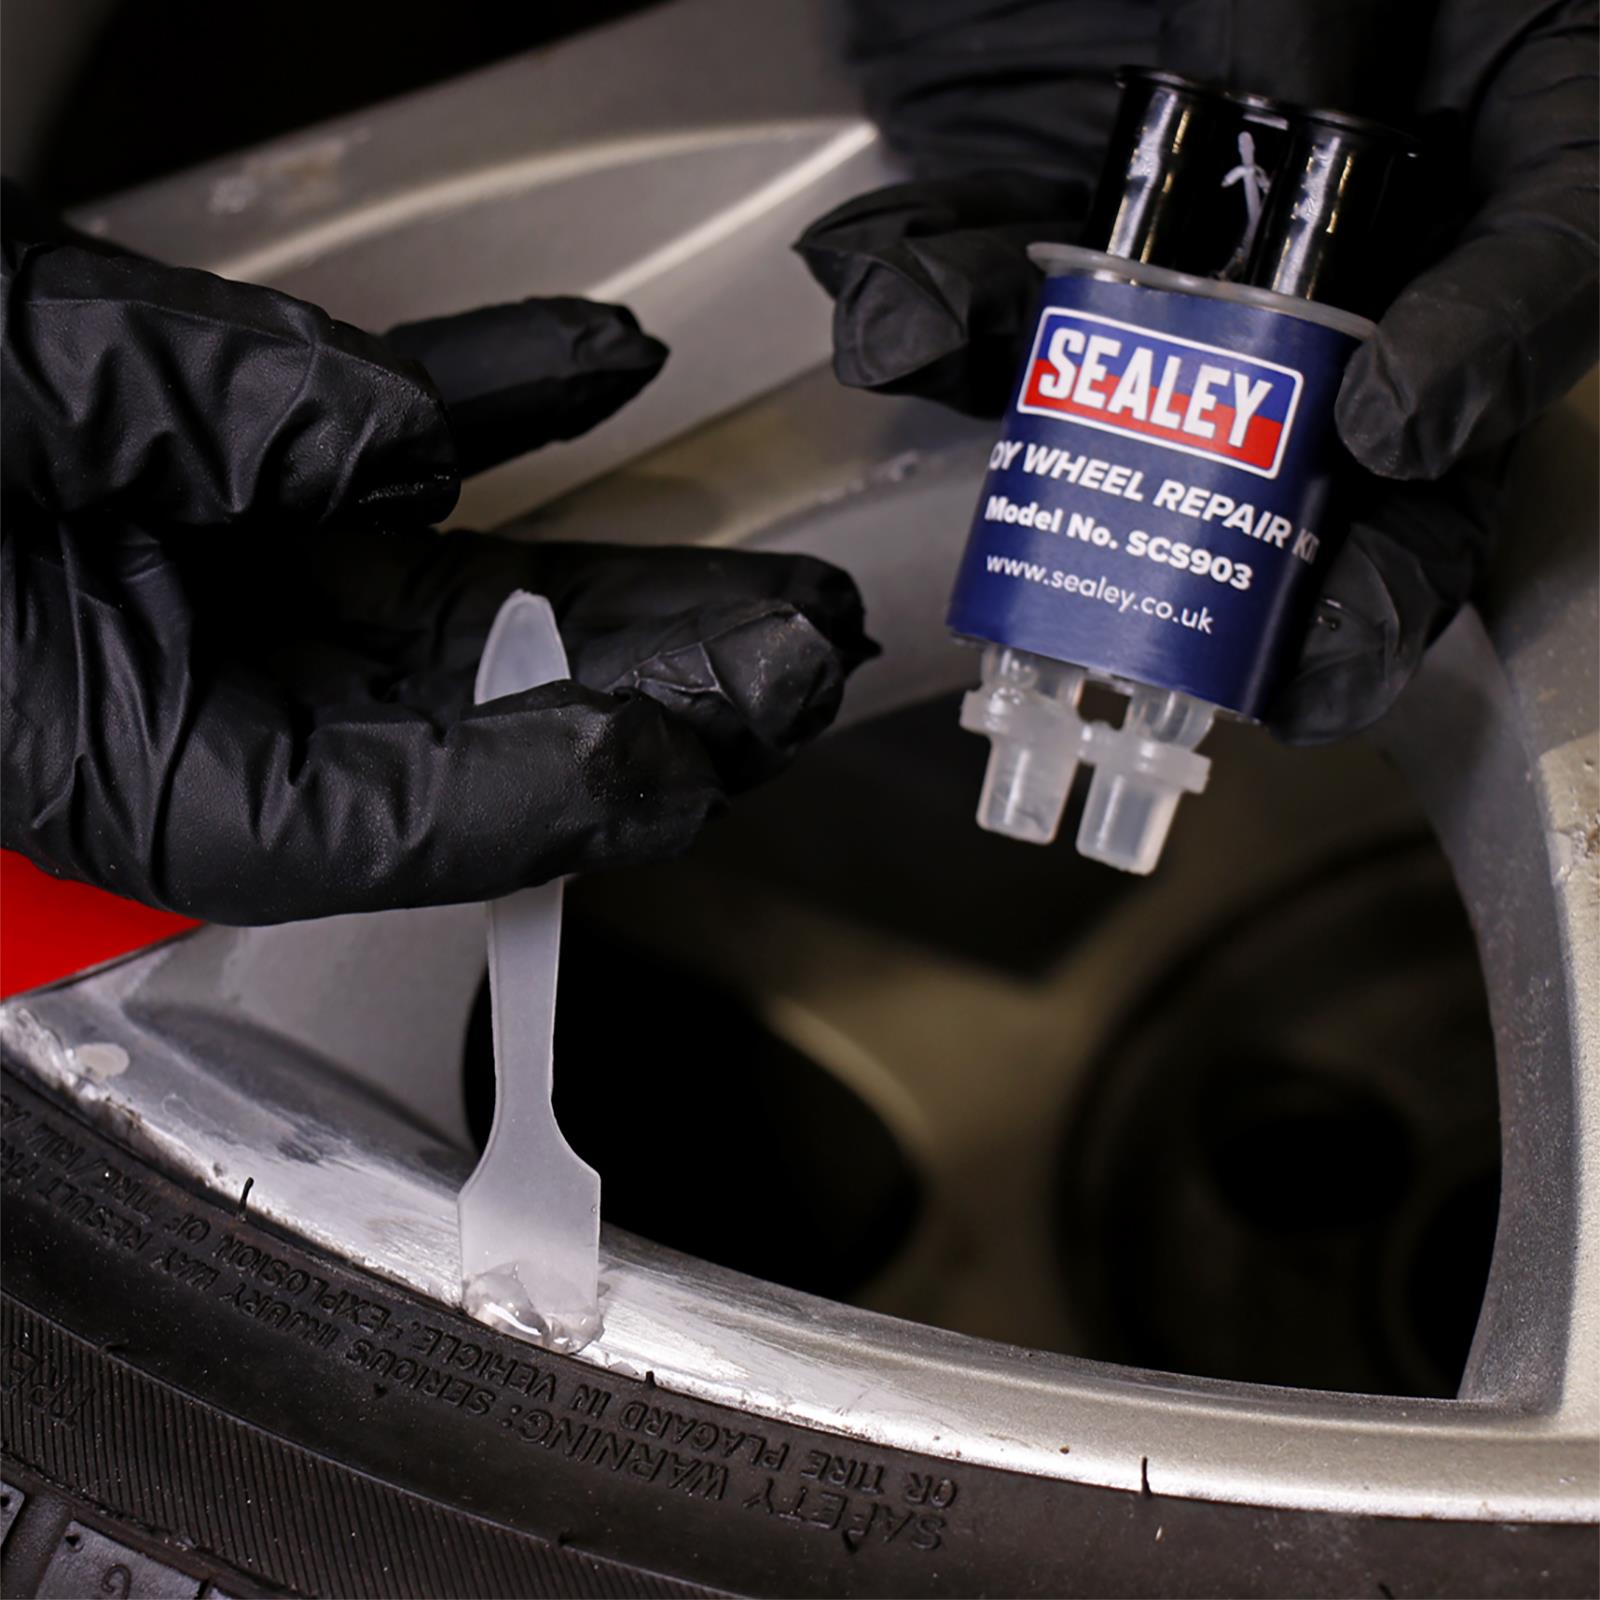 Sealey Alloy Wheel Repair Kit Repairs Cosmetic Damage Simply and Quickly